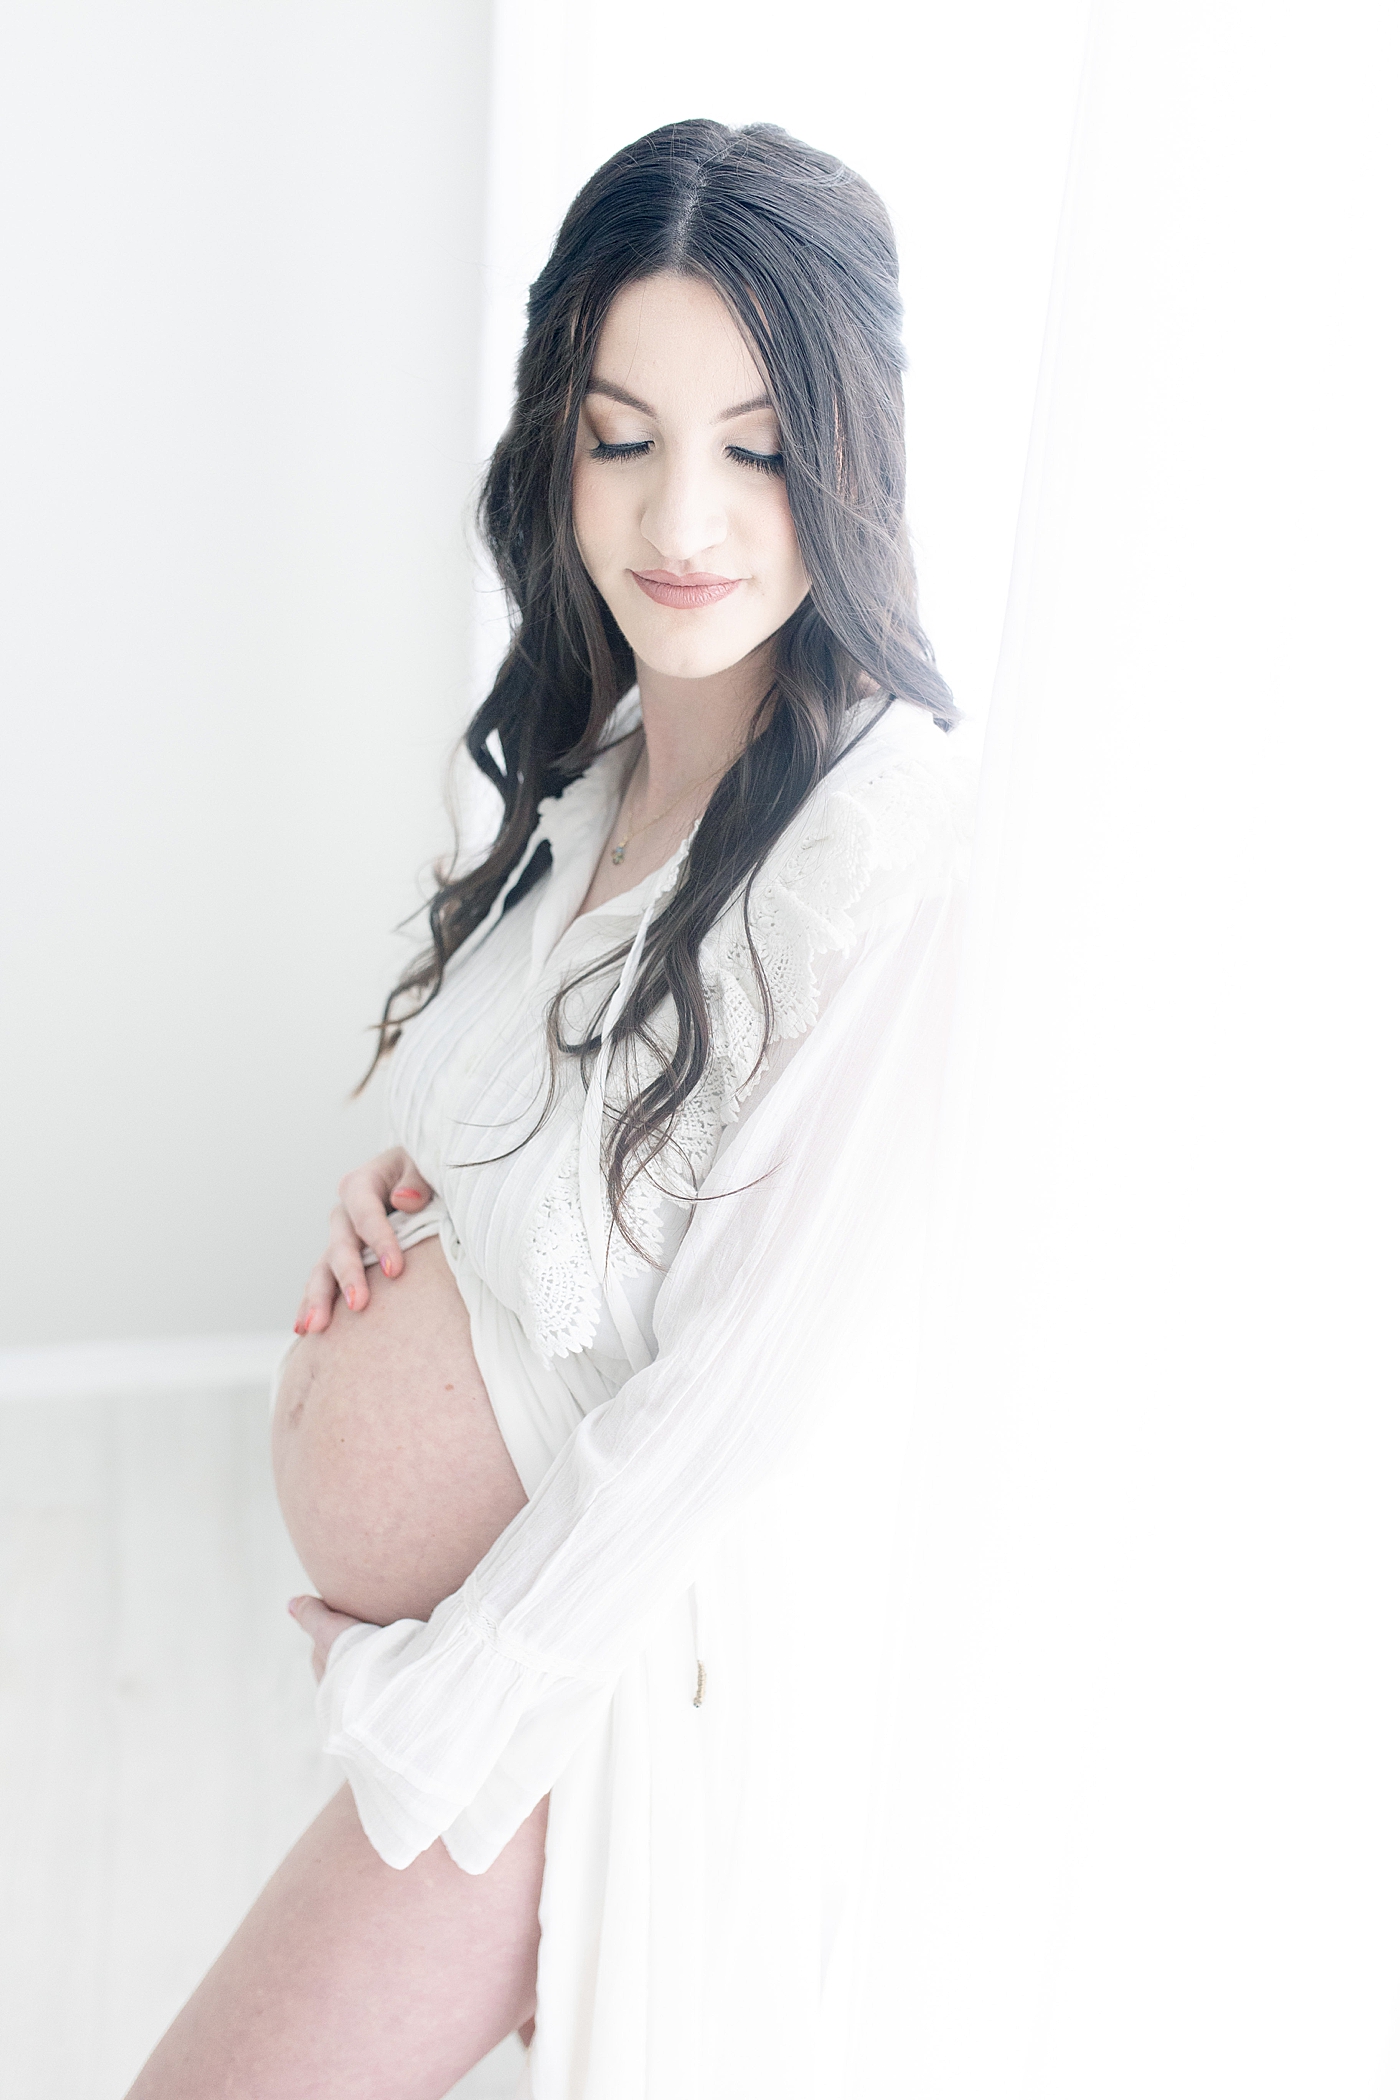 Mom embracing her bare belly during maternity photos. Photo by Little Sunshine Photography.